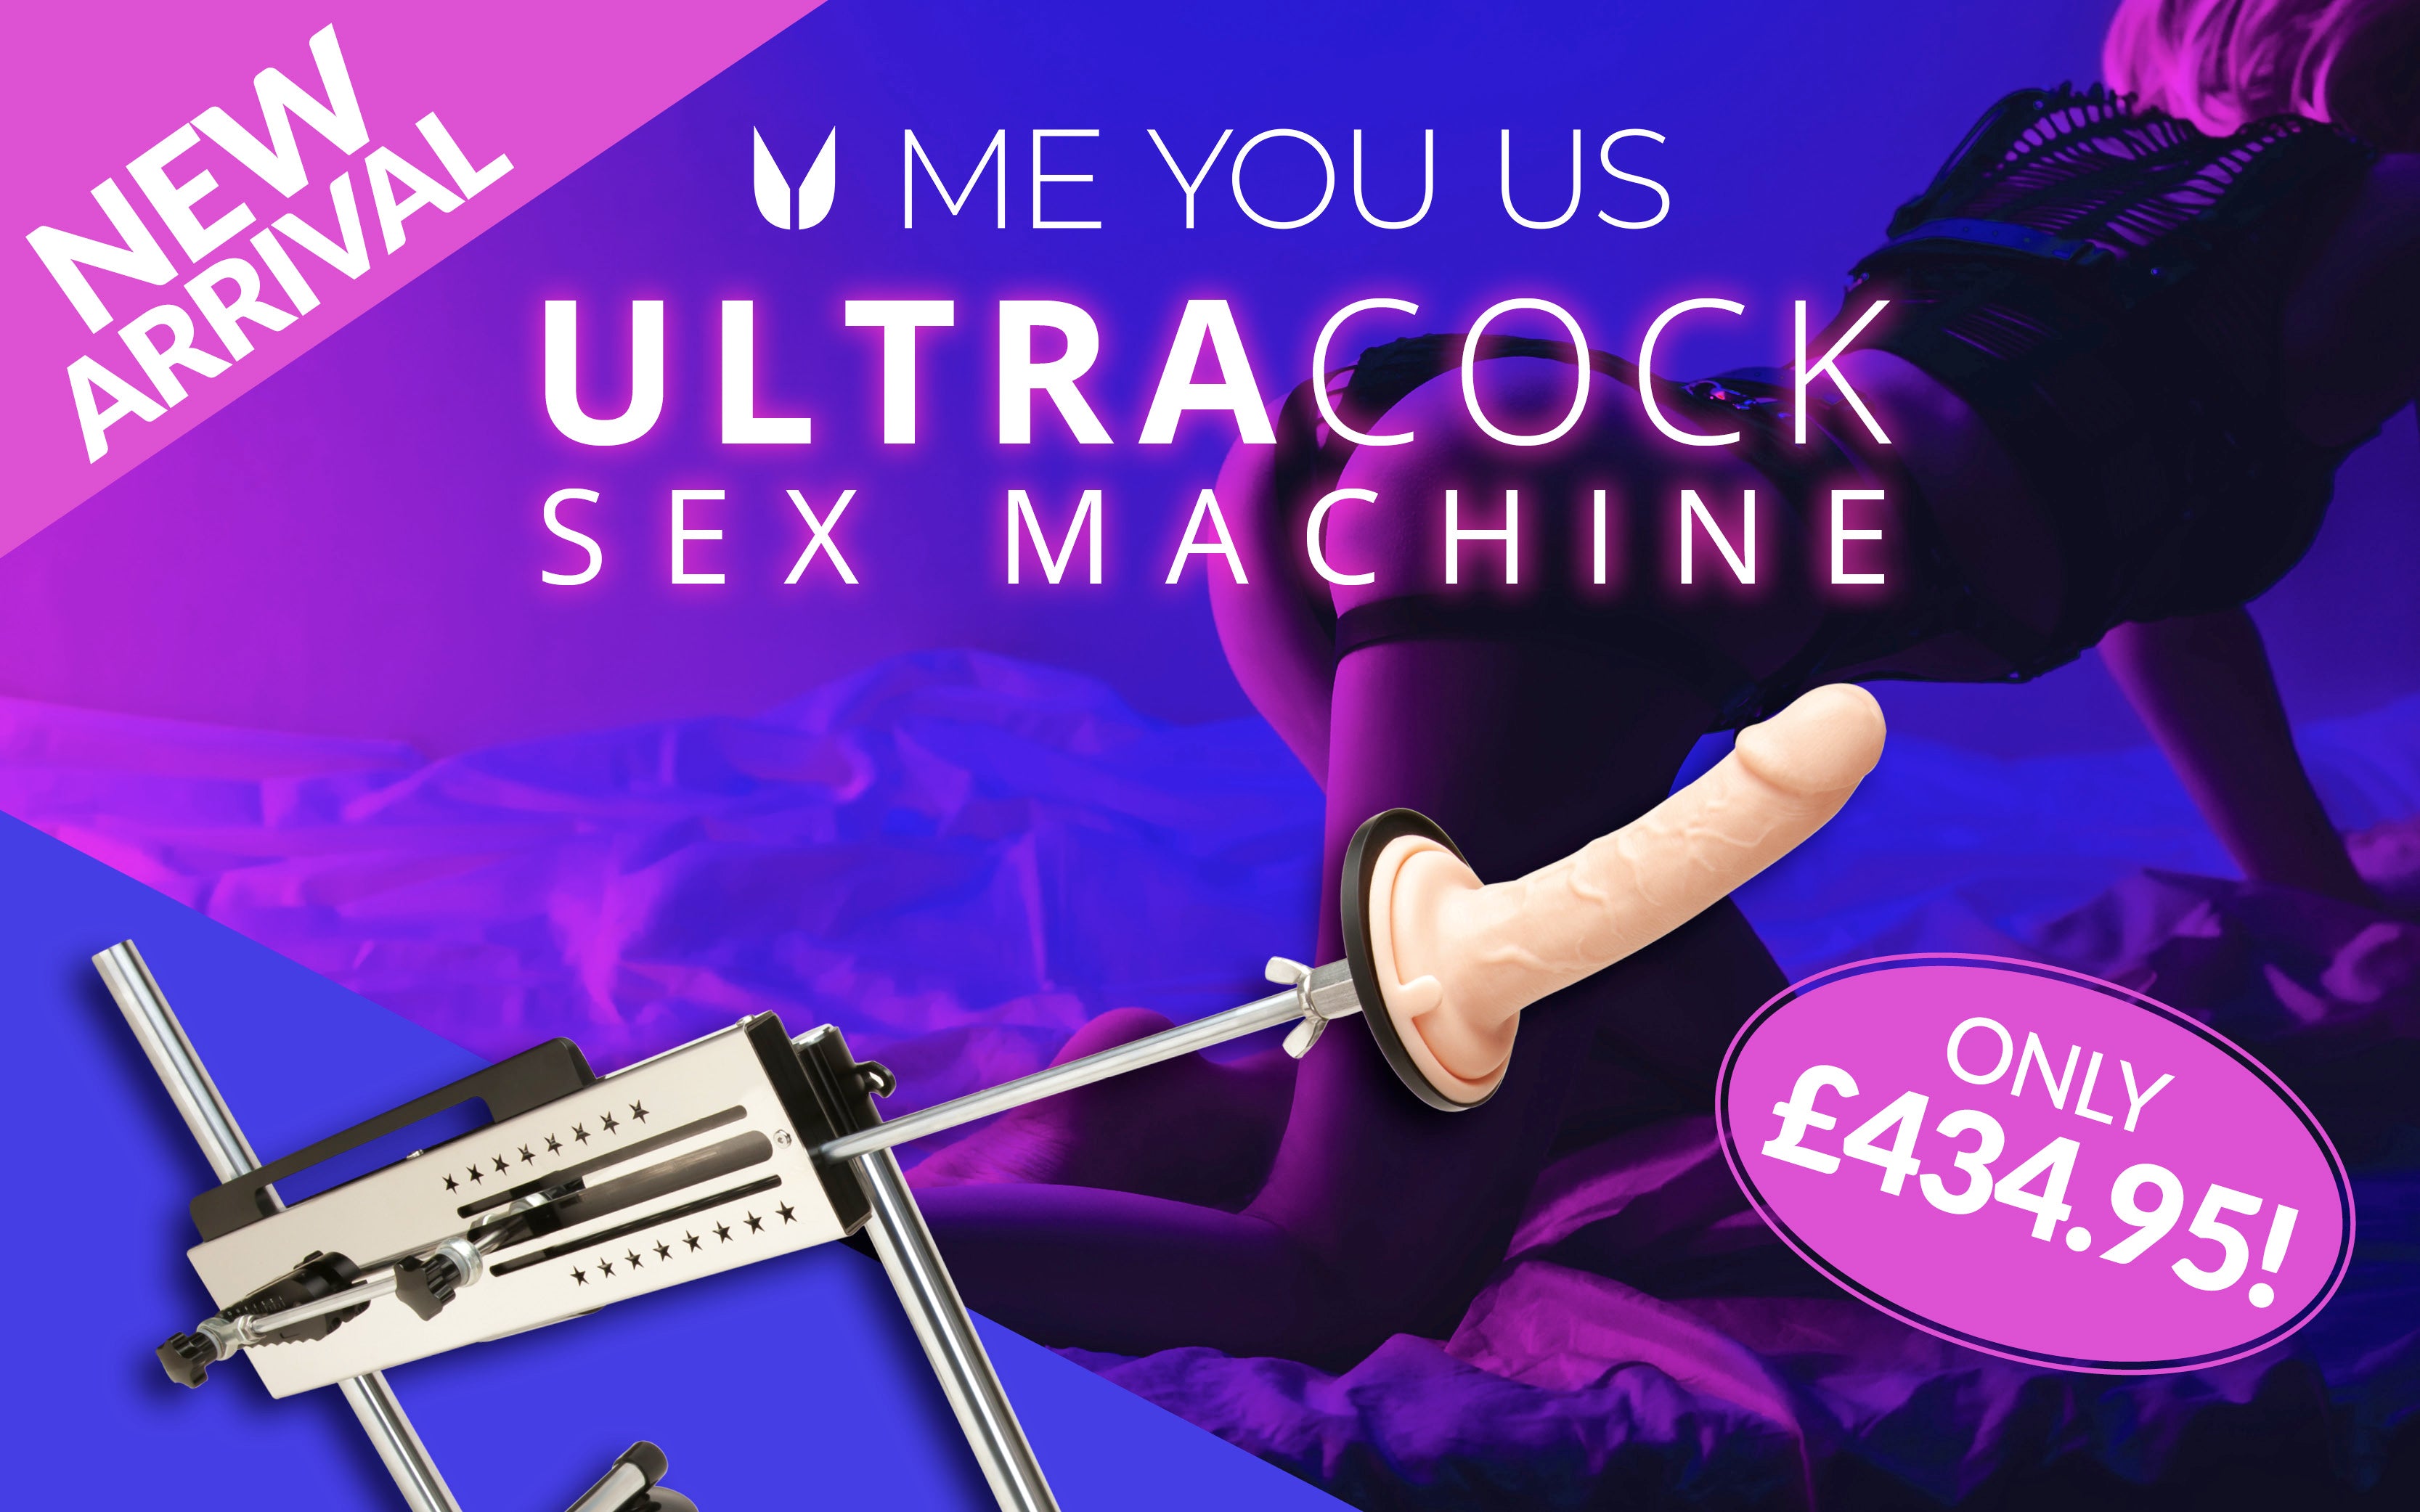 New Me You Us Sex Machine - Only £435.95 - Homepage Banner - Simply Pleasure - Desktop